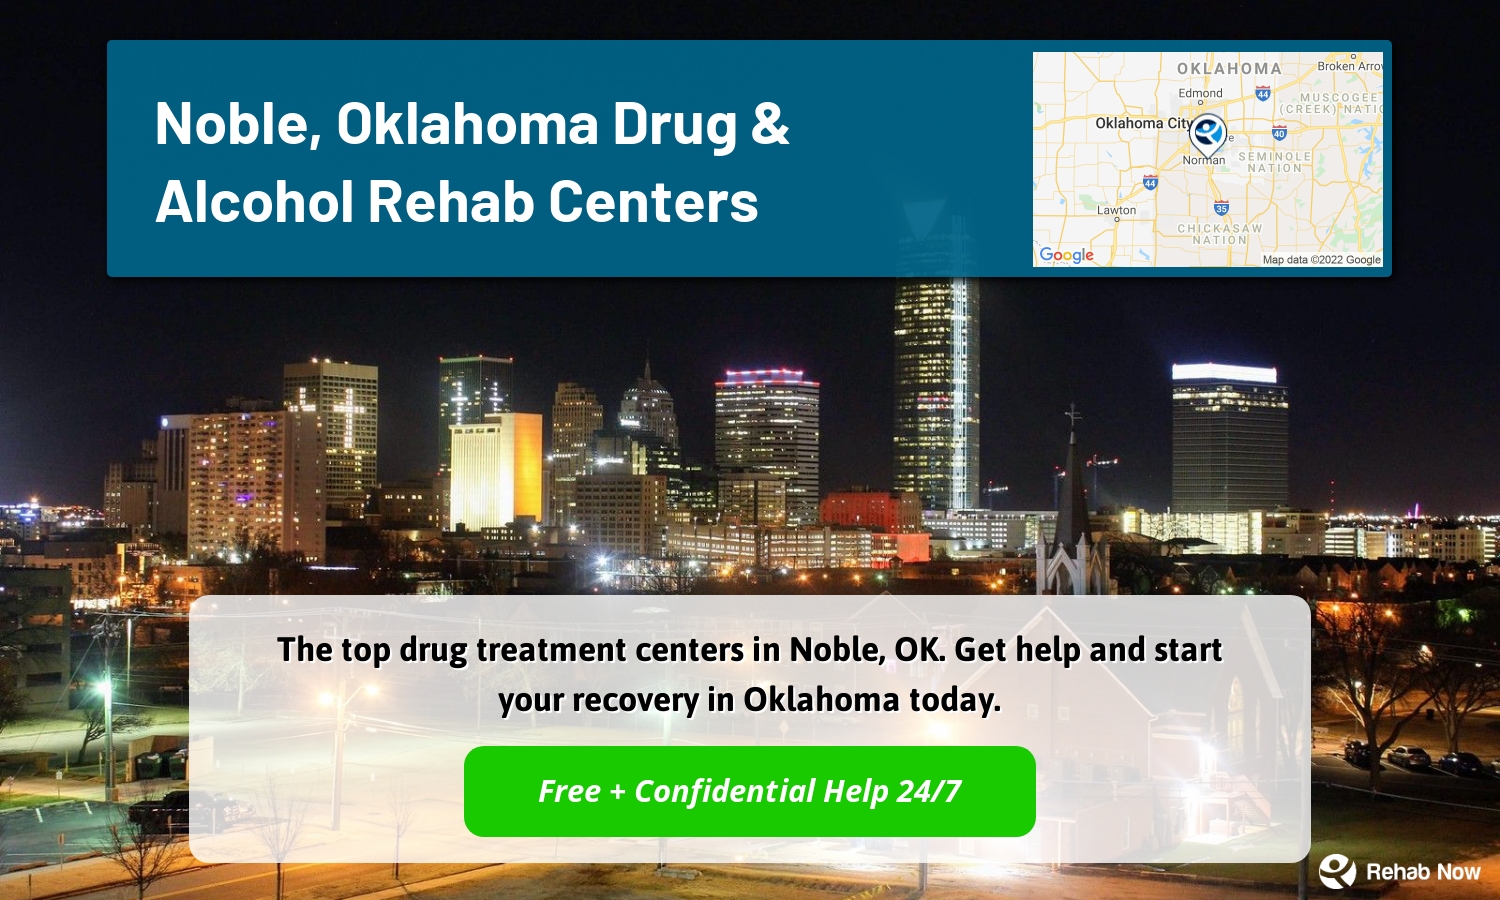 The top drug treatment centers in Noble, OK. Get help and start your recovery in Oklahoma today.